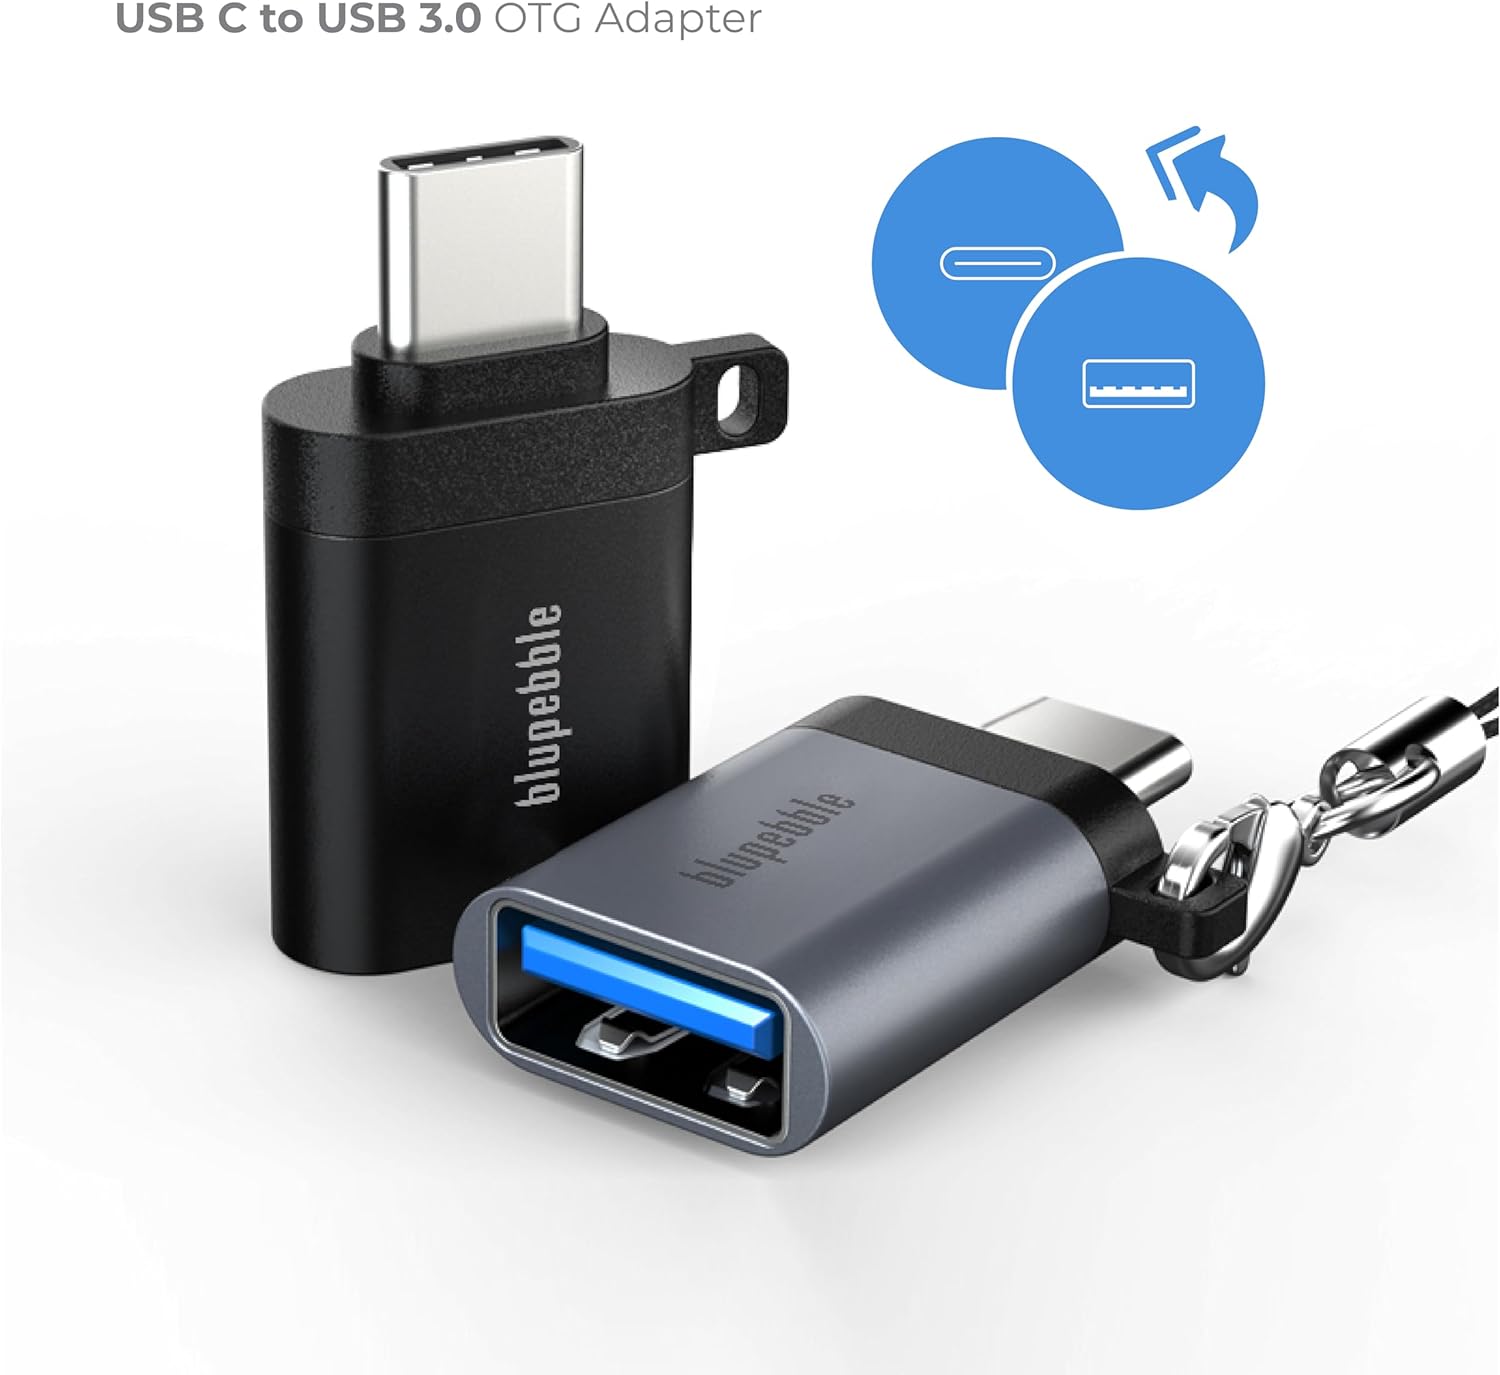 Blueppeble USB-A to USB C Adapter with C Male to 3.0 USB-A Female OTG Adapter Compatible with iPhone 15 MacBook Air iPad Pro, Samsung Galaxy Thunderbolt 4/3 Devices - Black